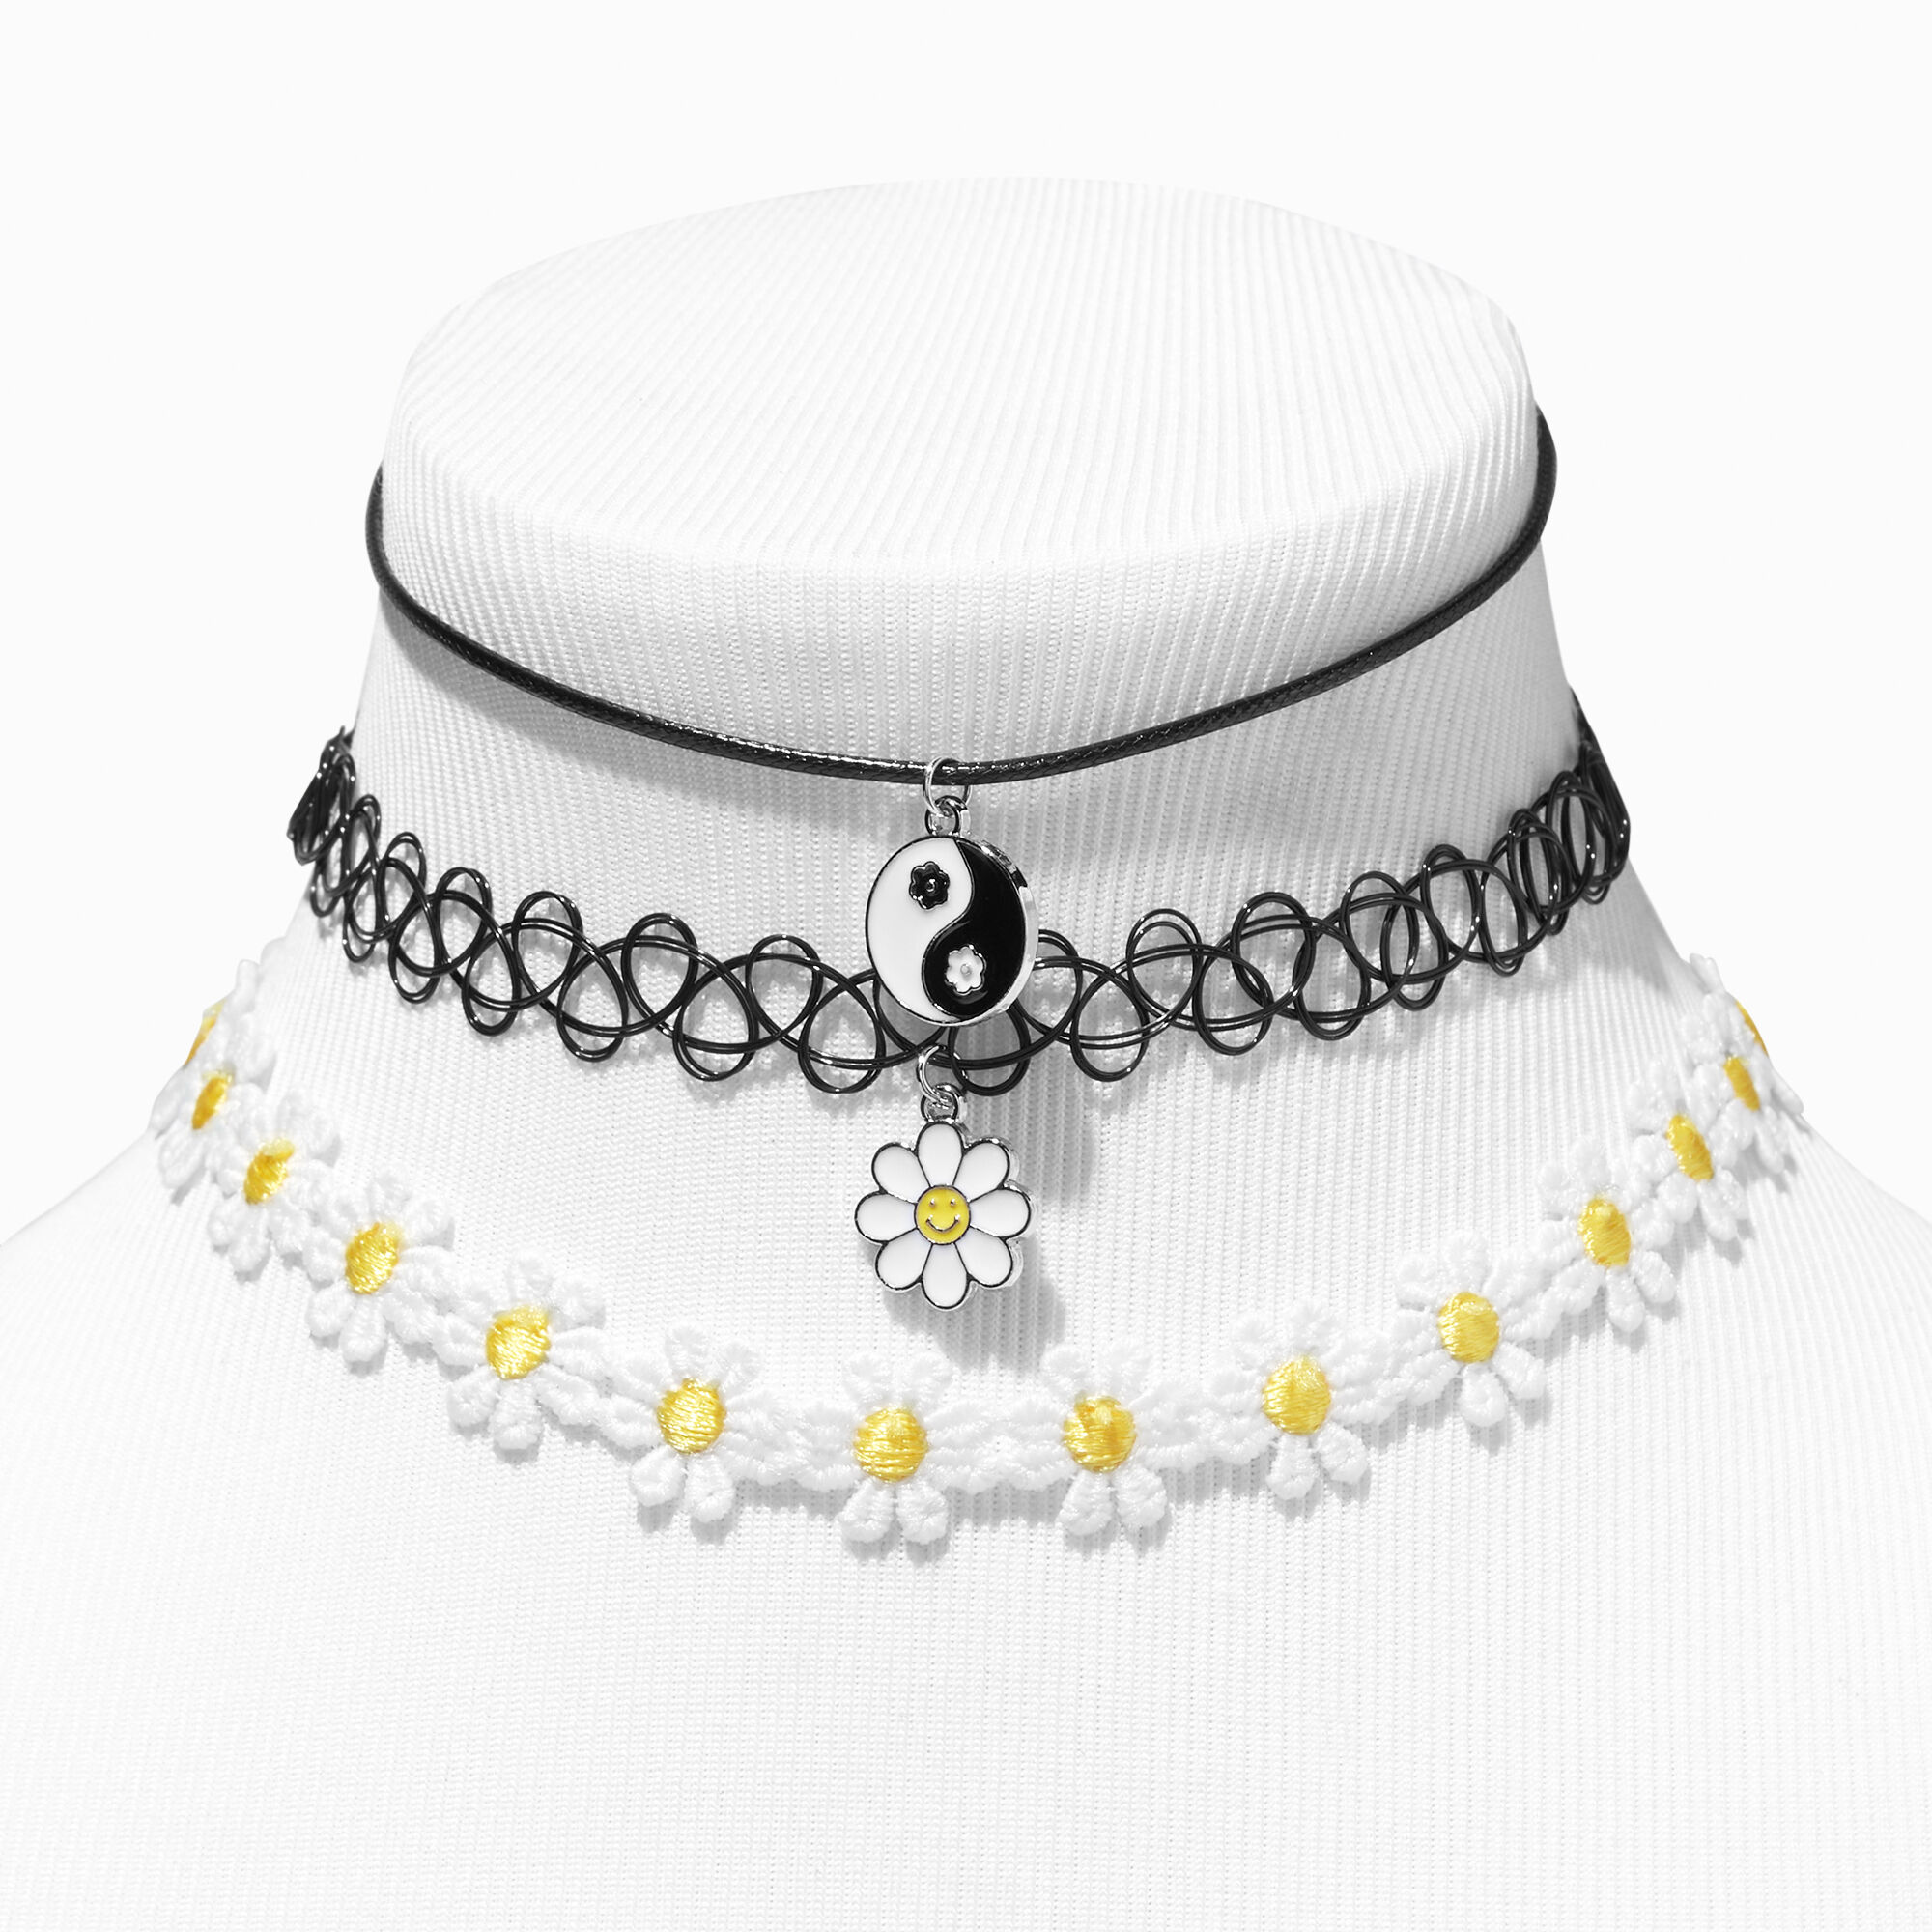 View Claires Yin Yang Daisy Choker Necklaces 3 Pack Black information